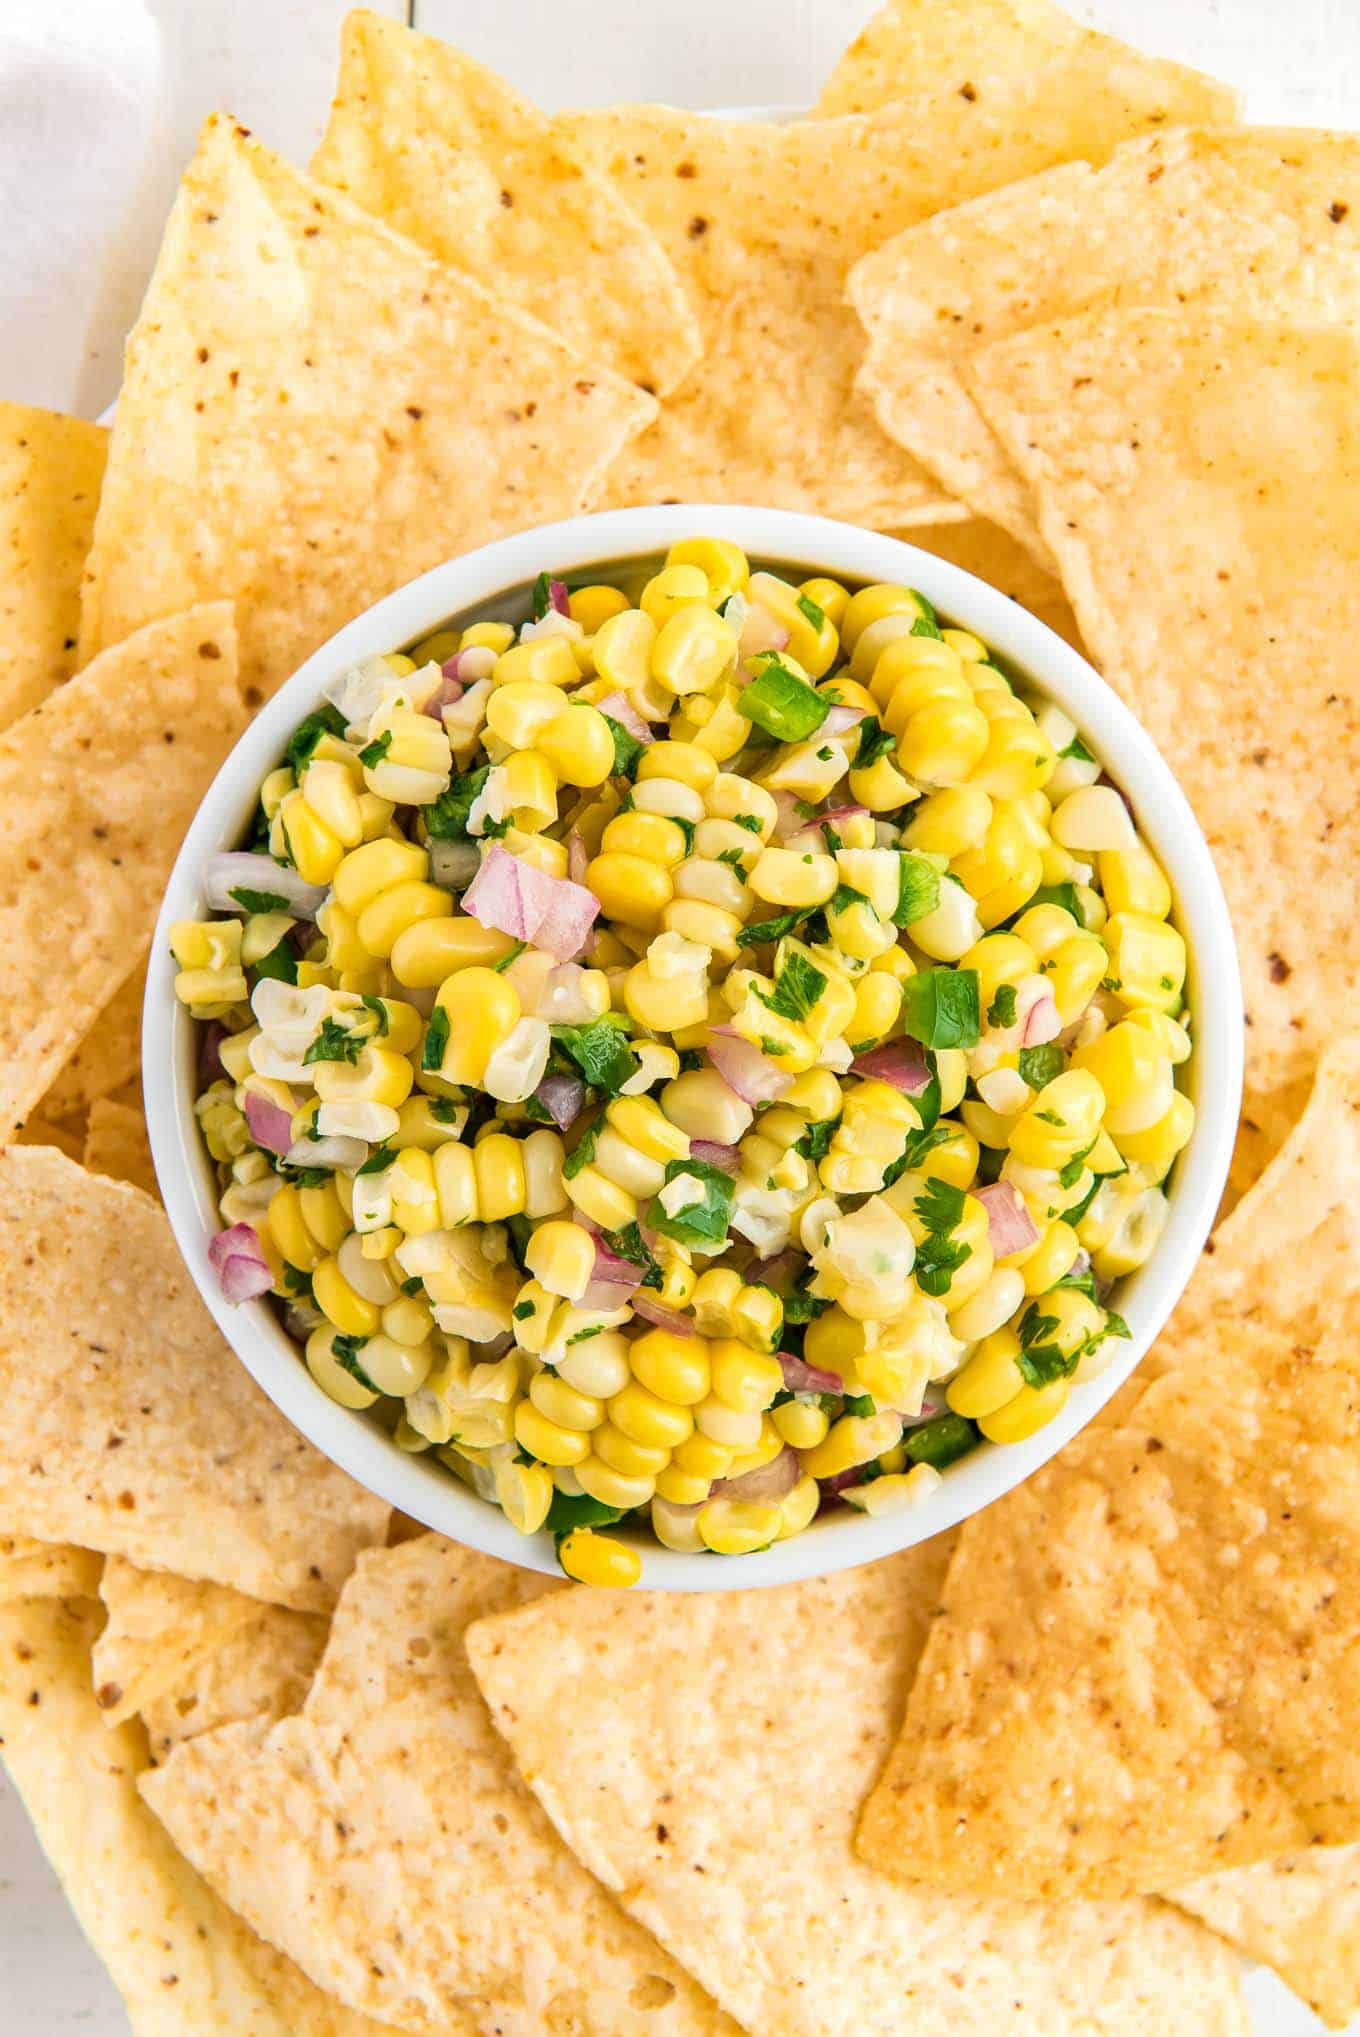 Corn salsa chipotle in a bowl on the table with tortilla chips surrounding the bowl.